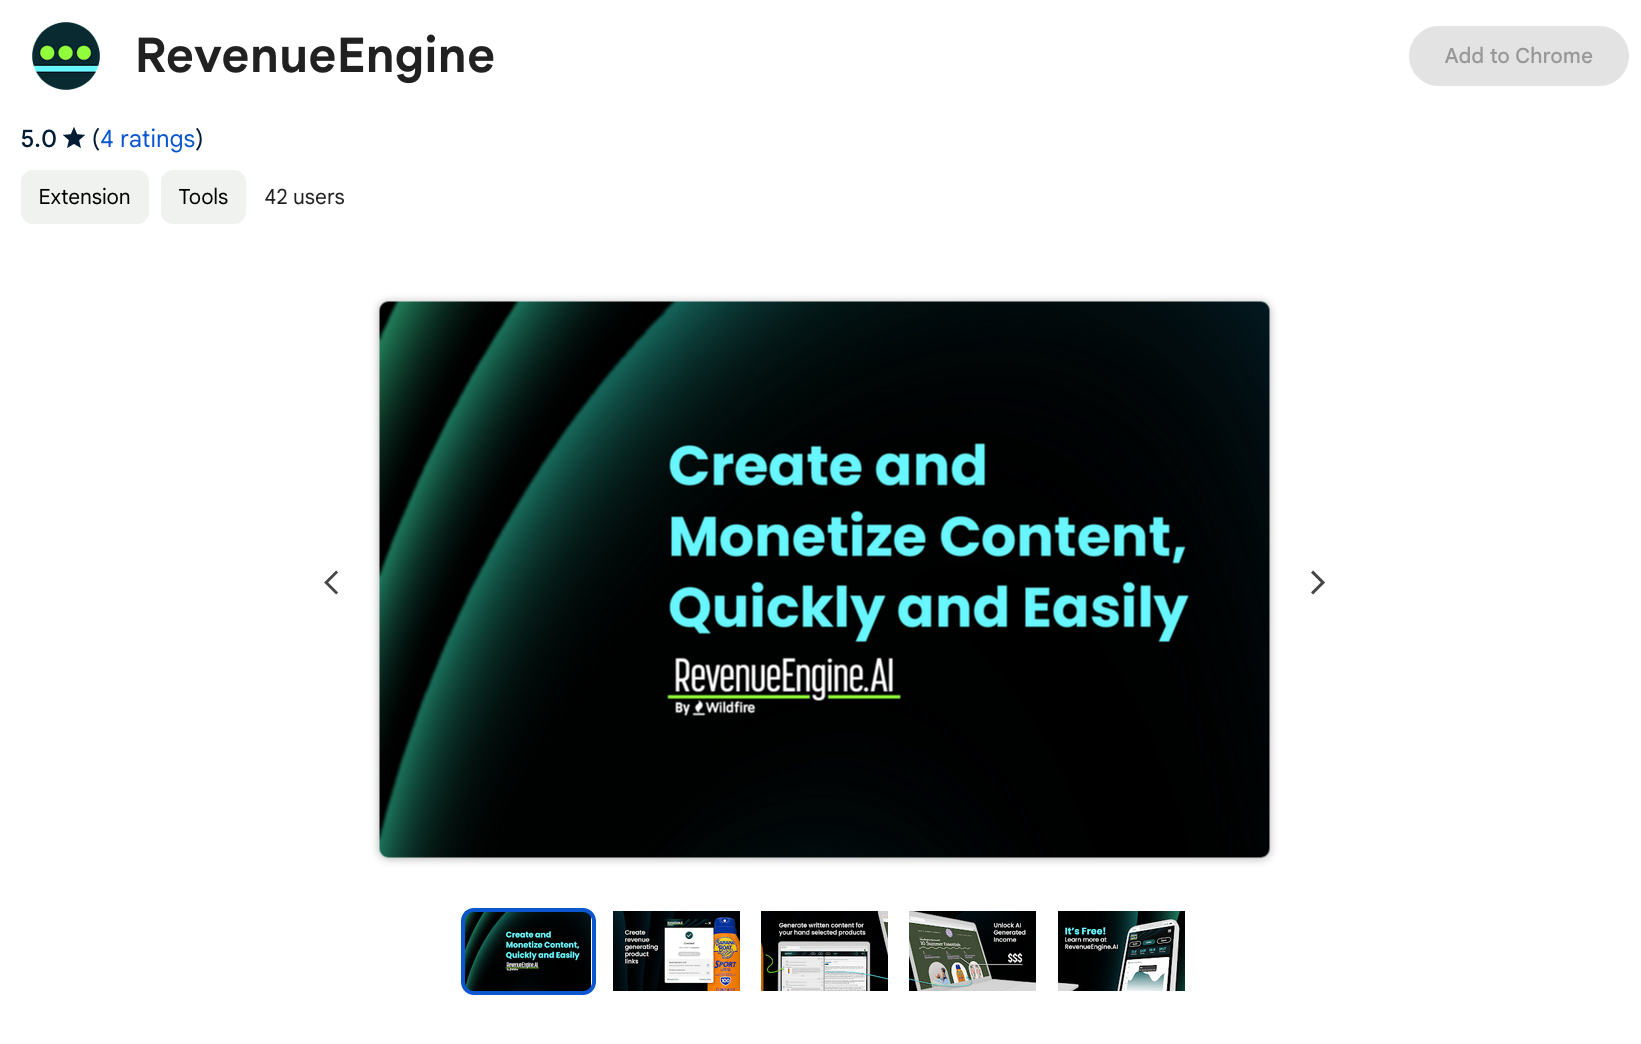 Wildfire Systems' New RevenueEngine Browser Extension Offers a Convenient Way to Leverage Generative AI to Create Monetized Content
